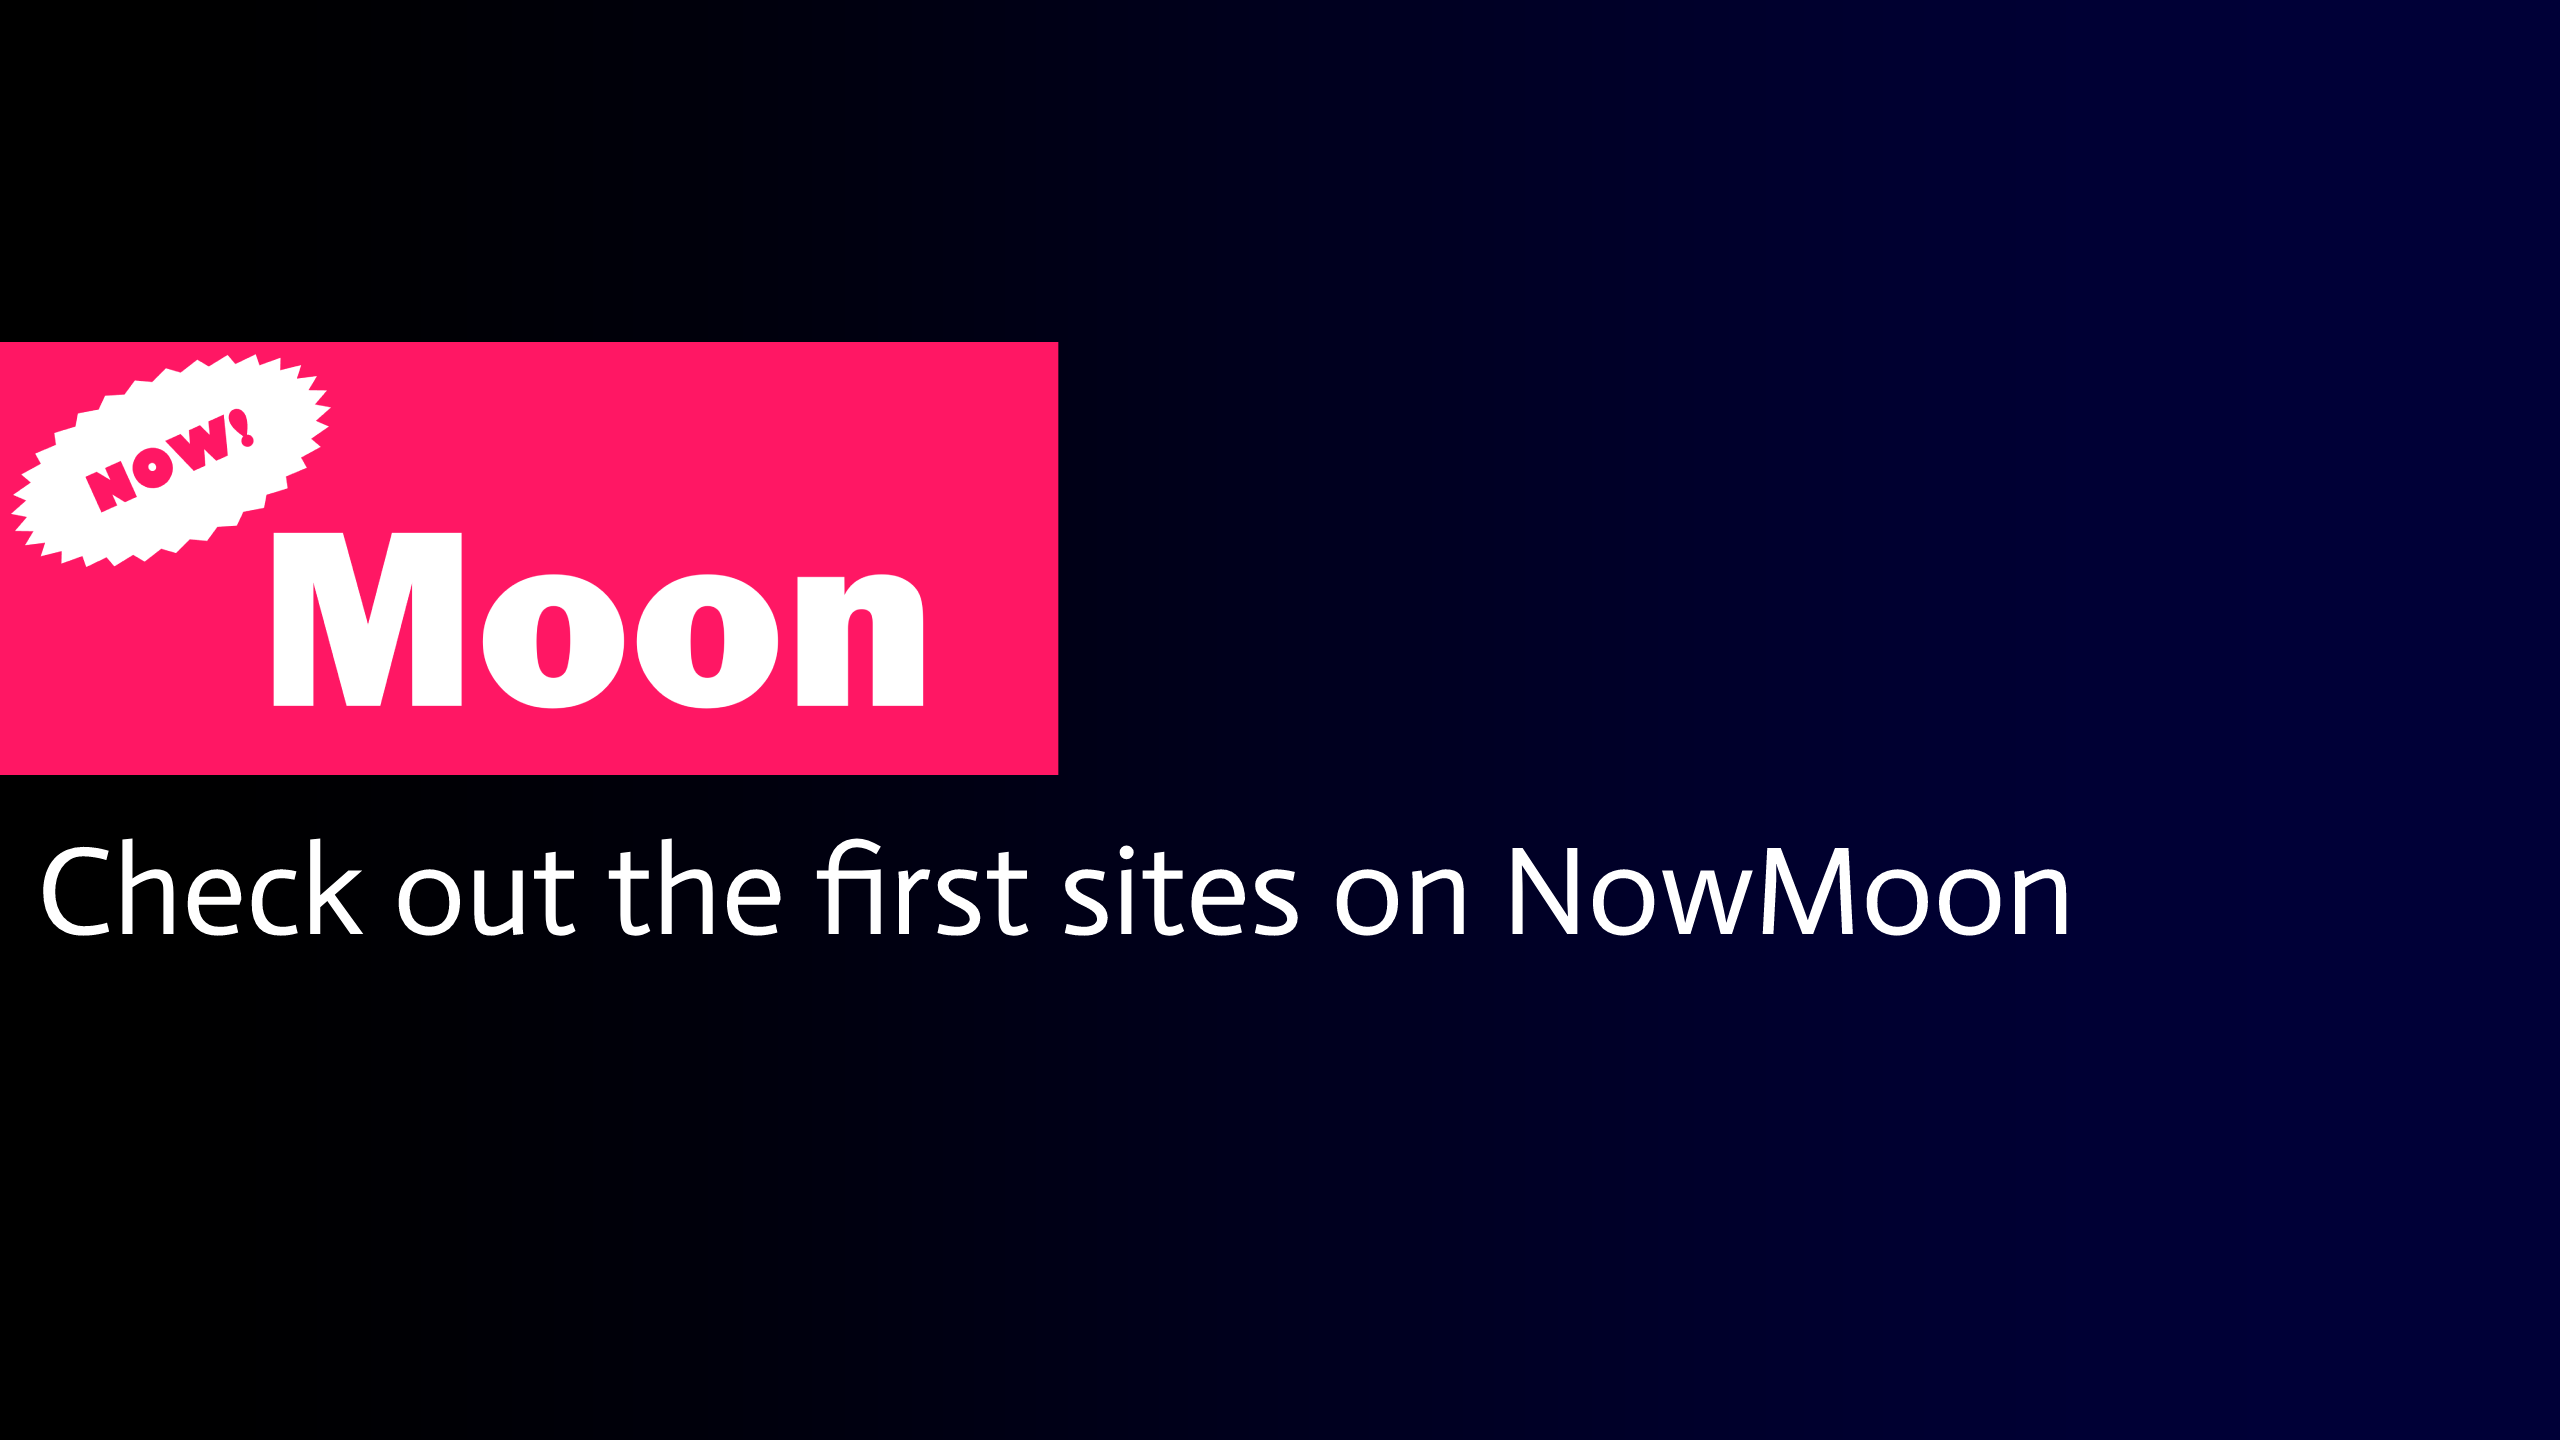 Now Moon has started operations!